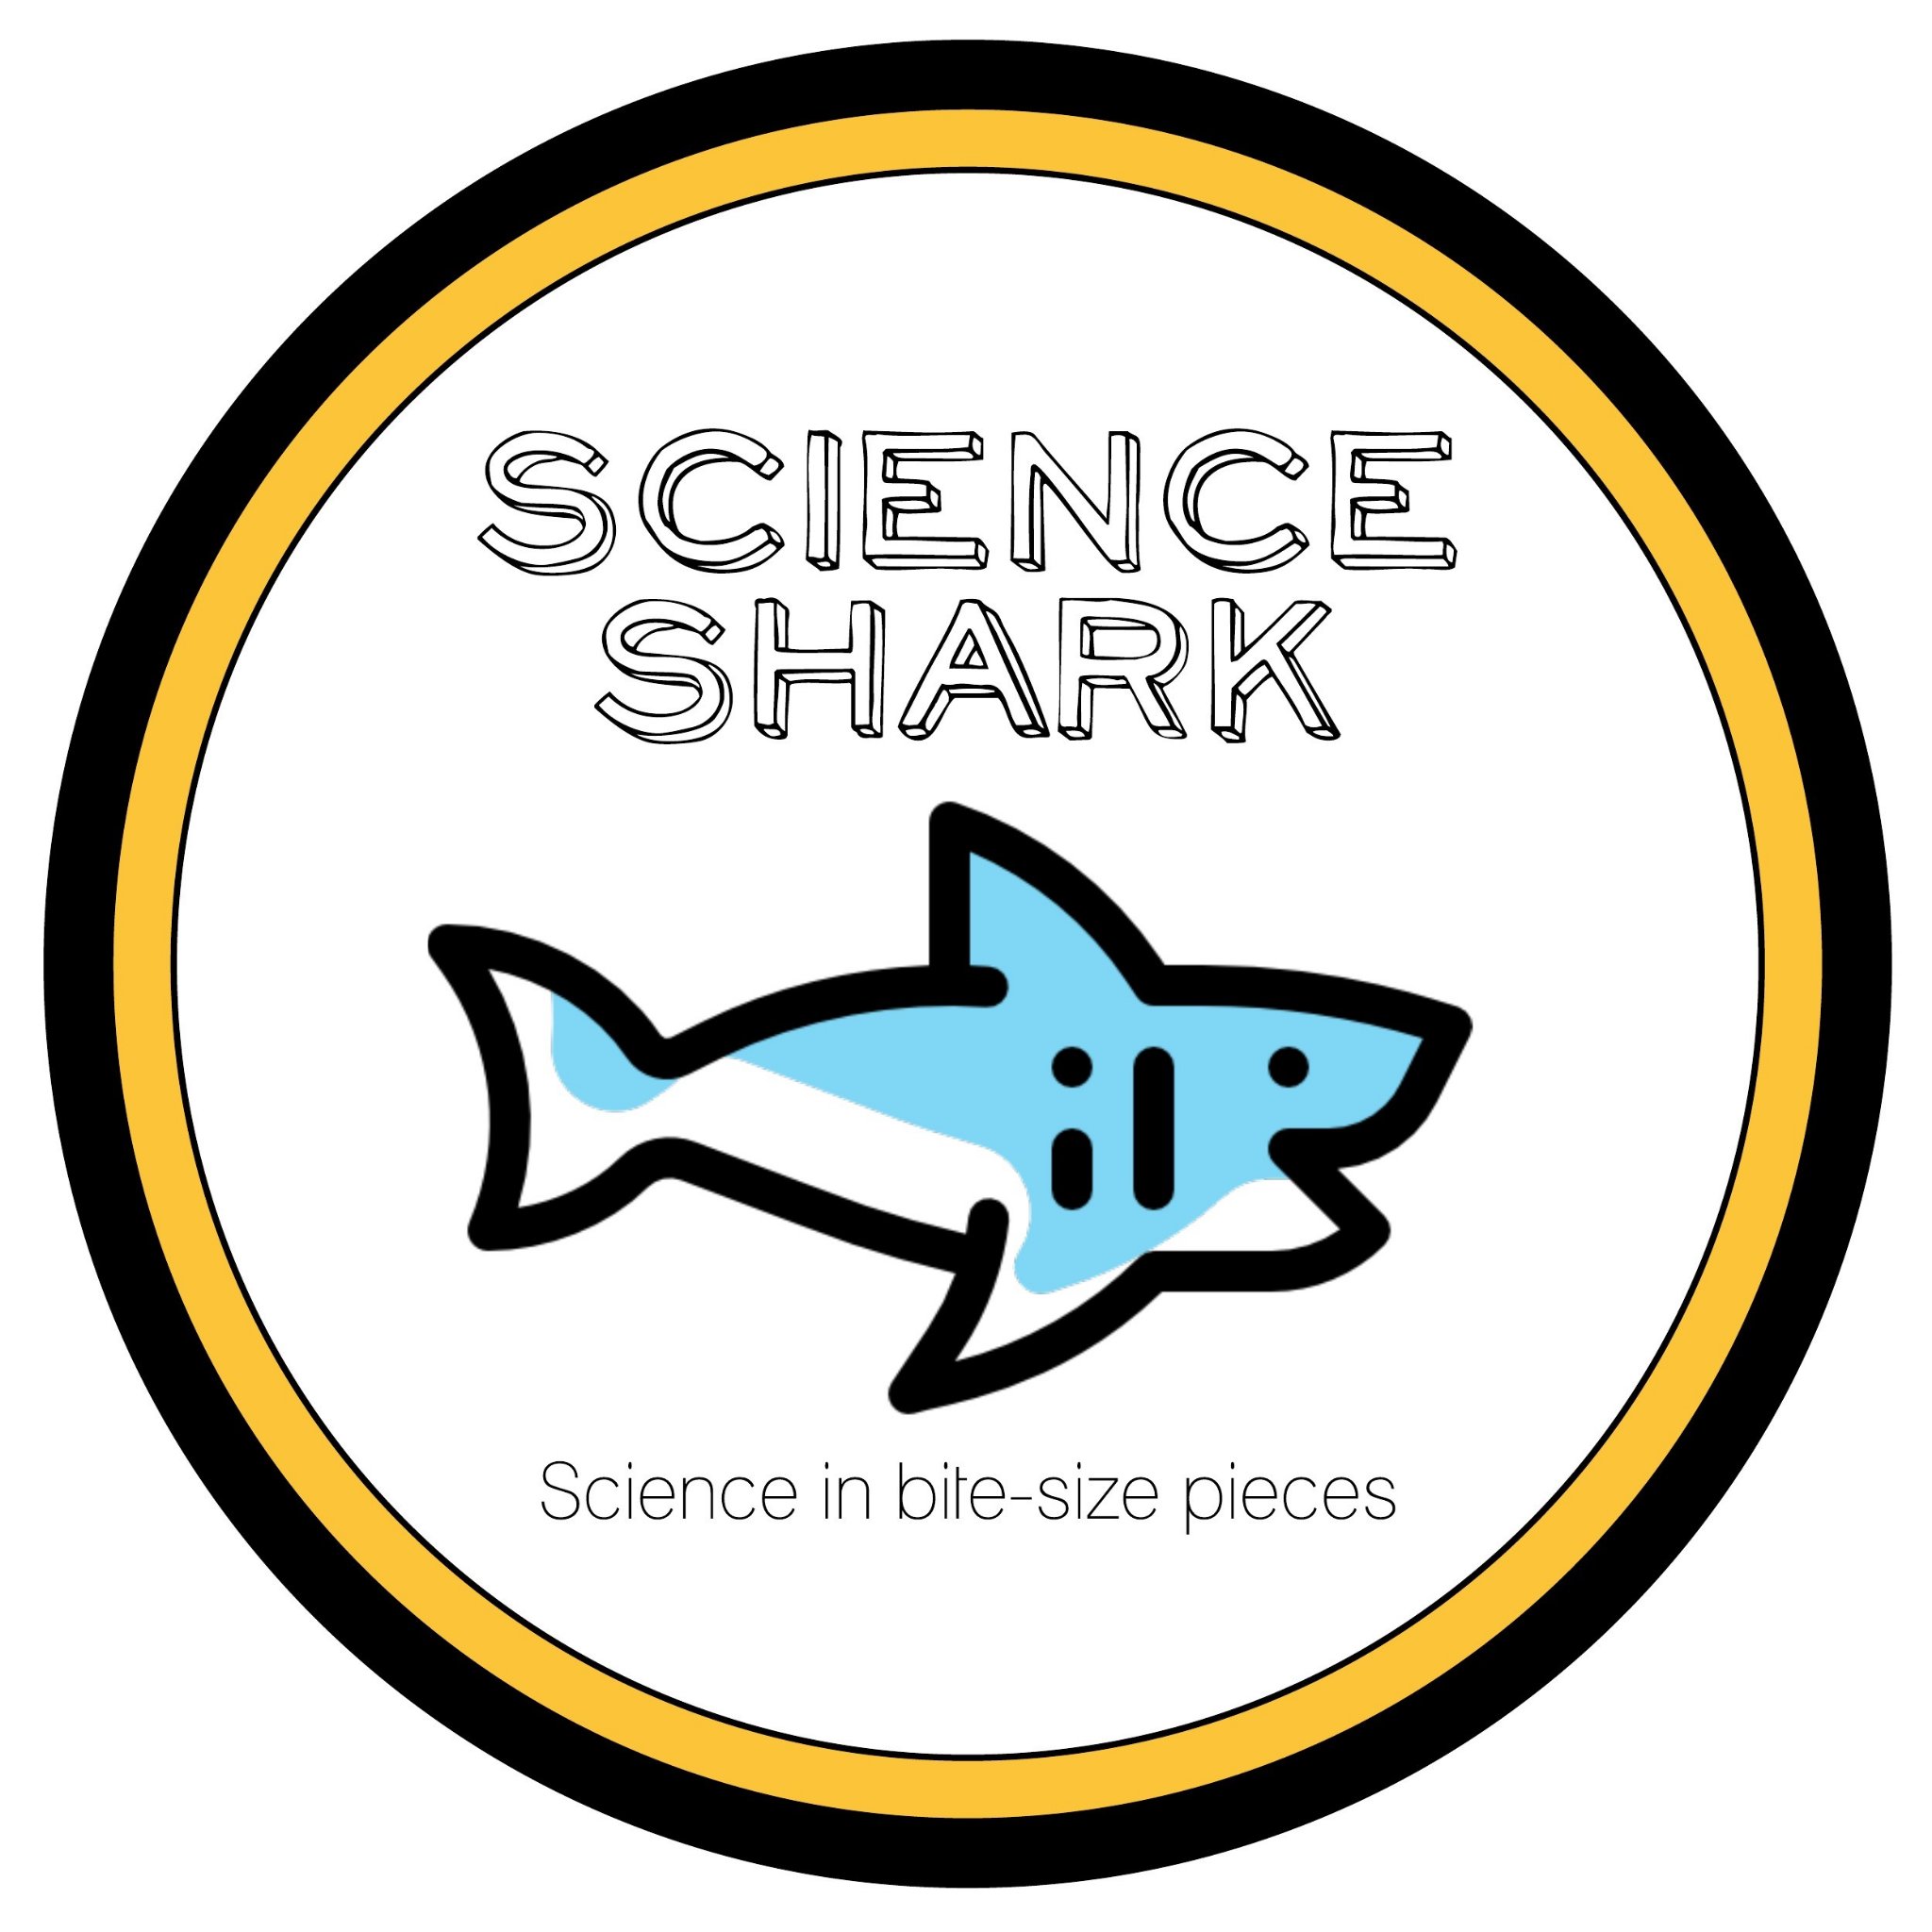 ScienceShark is a small #scienceblog about amazing #wildlife #animals. Check out our factsheets and infographics ! Favourite themes ? #nature #wildlife #space